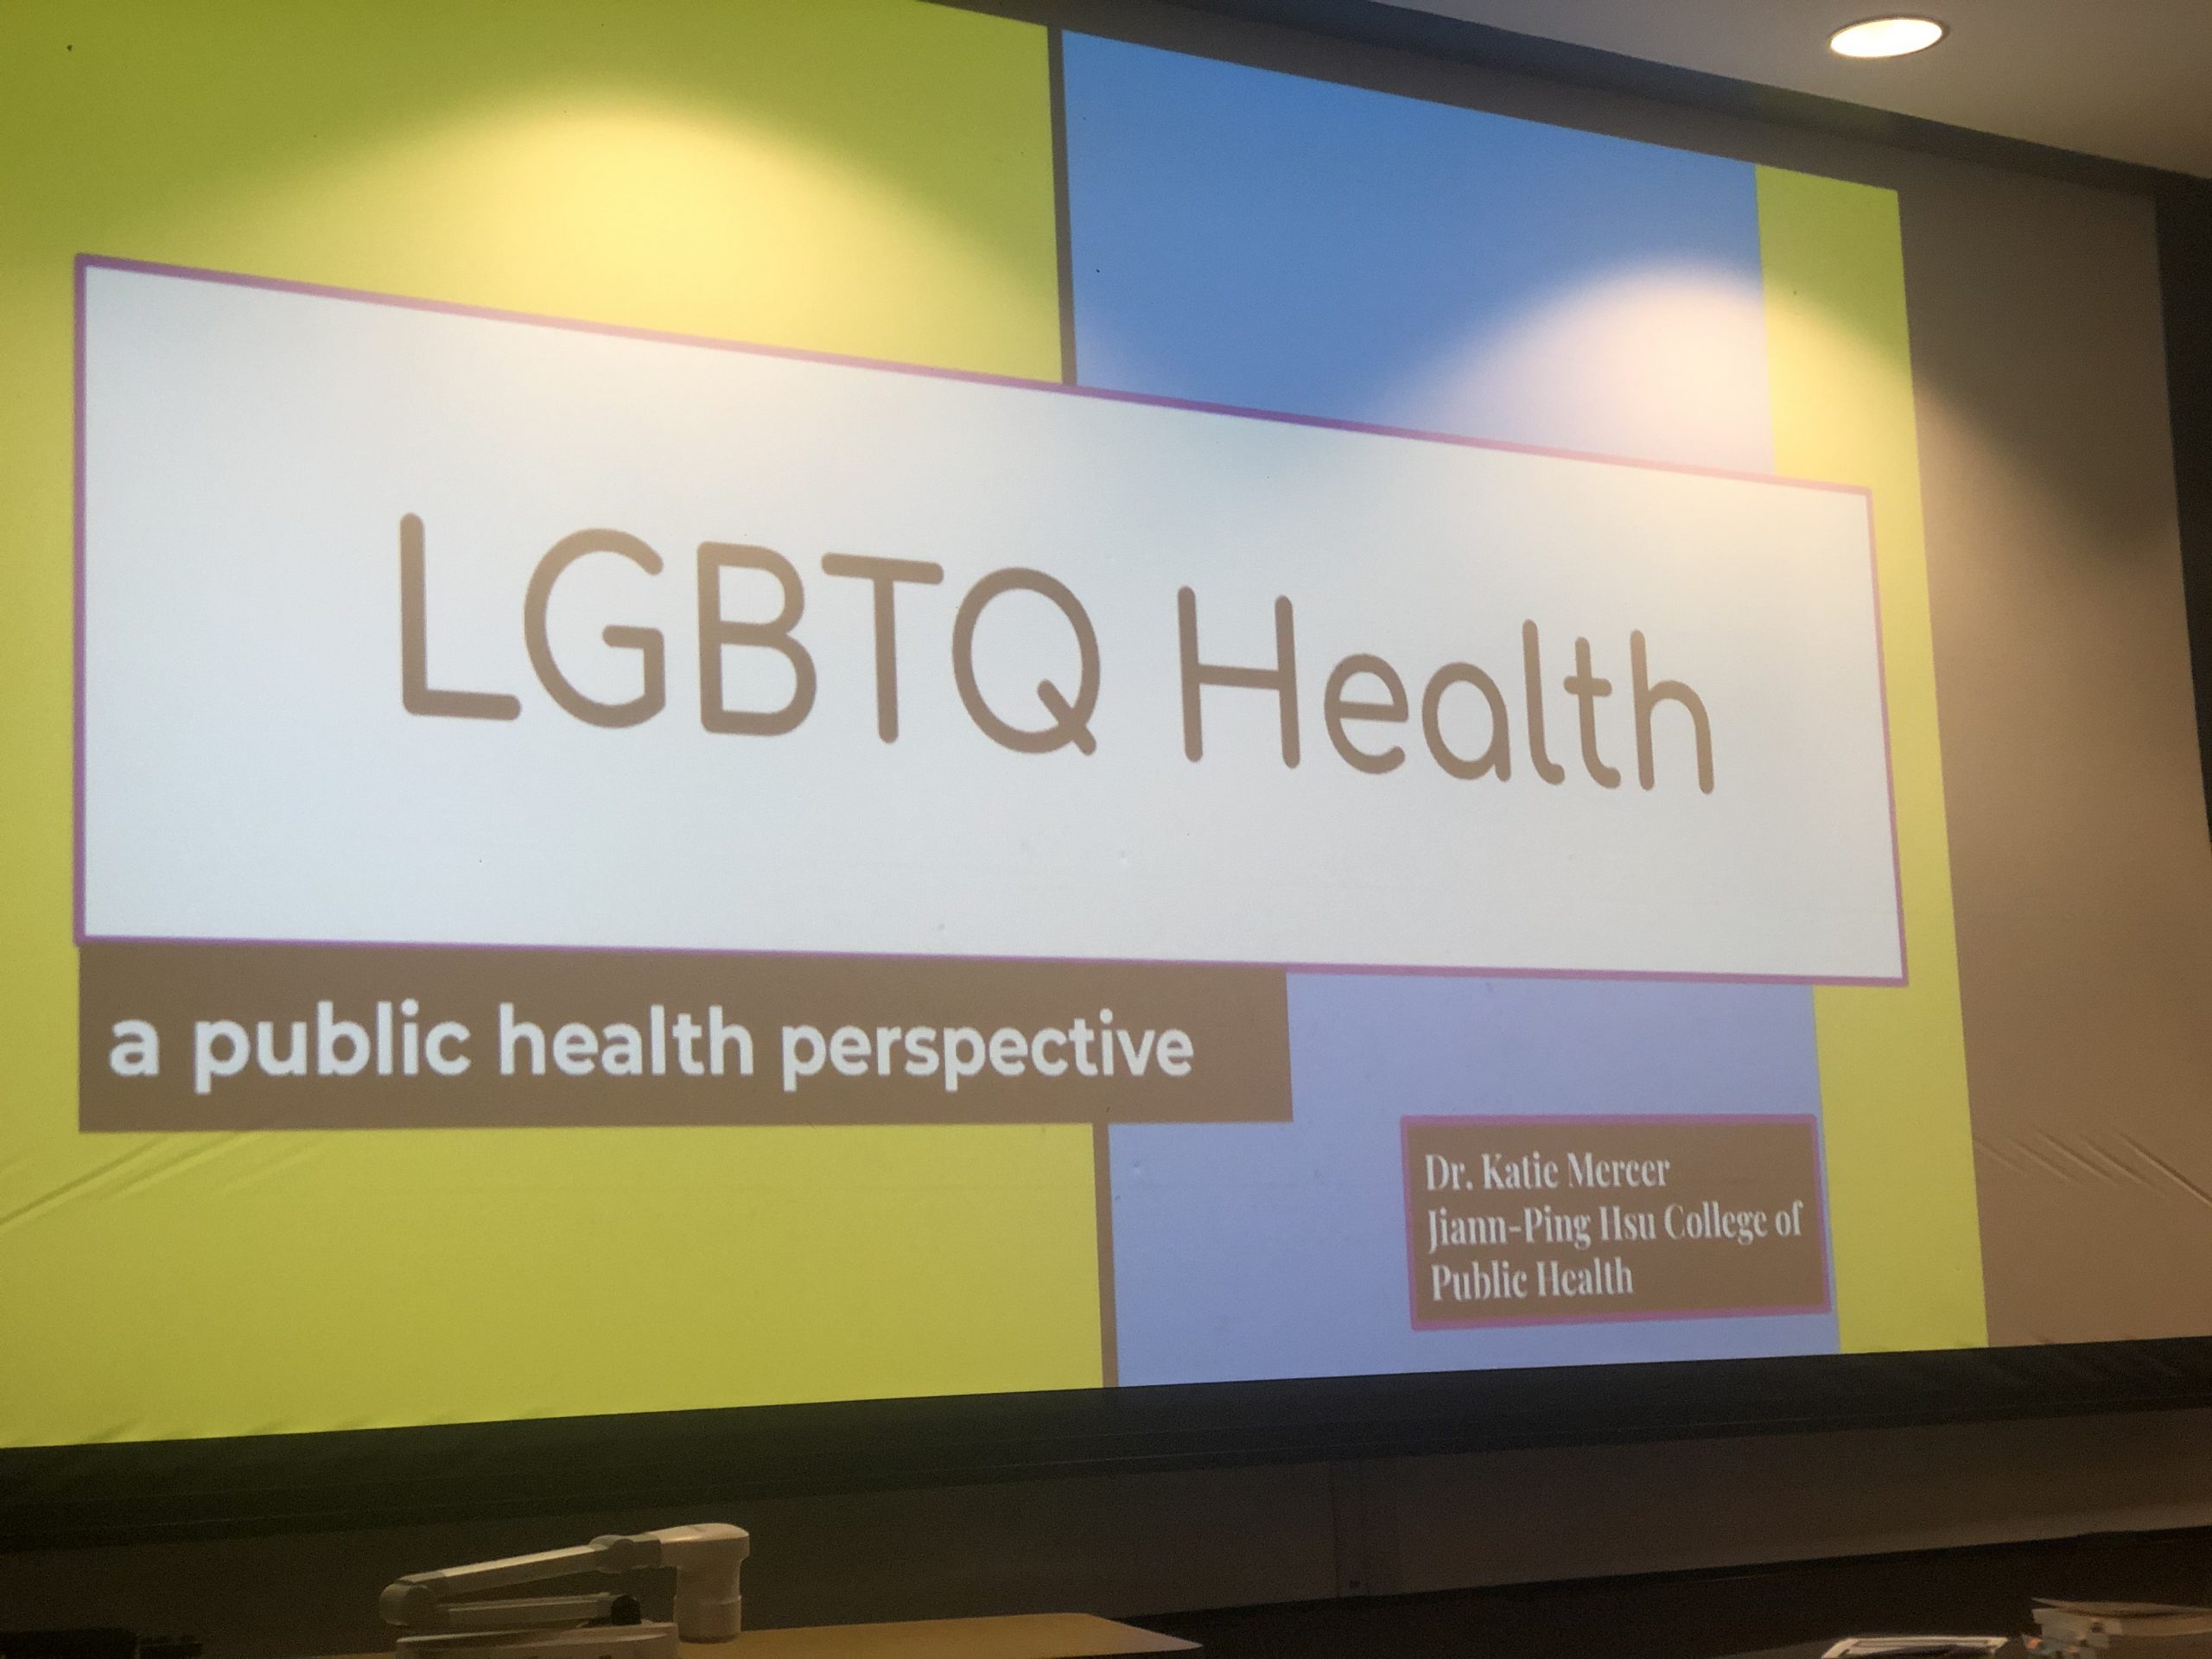 Taking Pride in Your Health: Presentation Aims to Address Healthcare Issues Faced by the LGBTQ+ Community